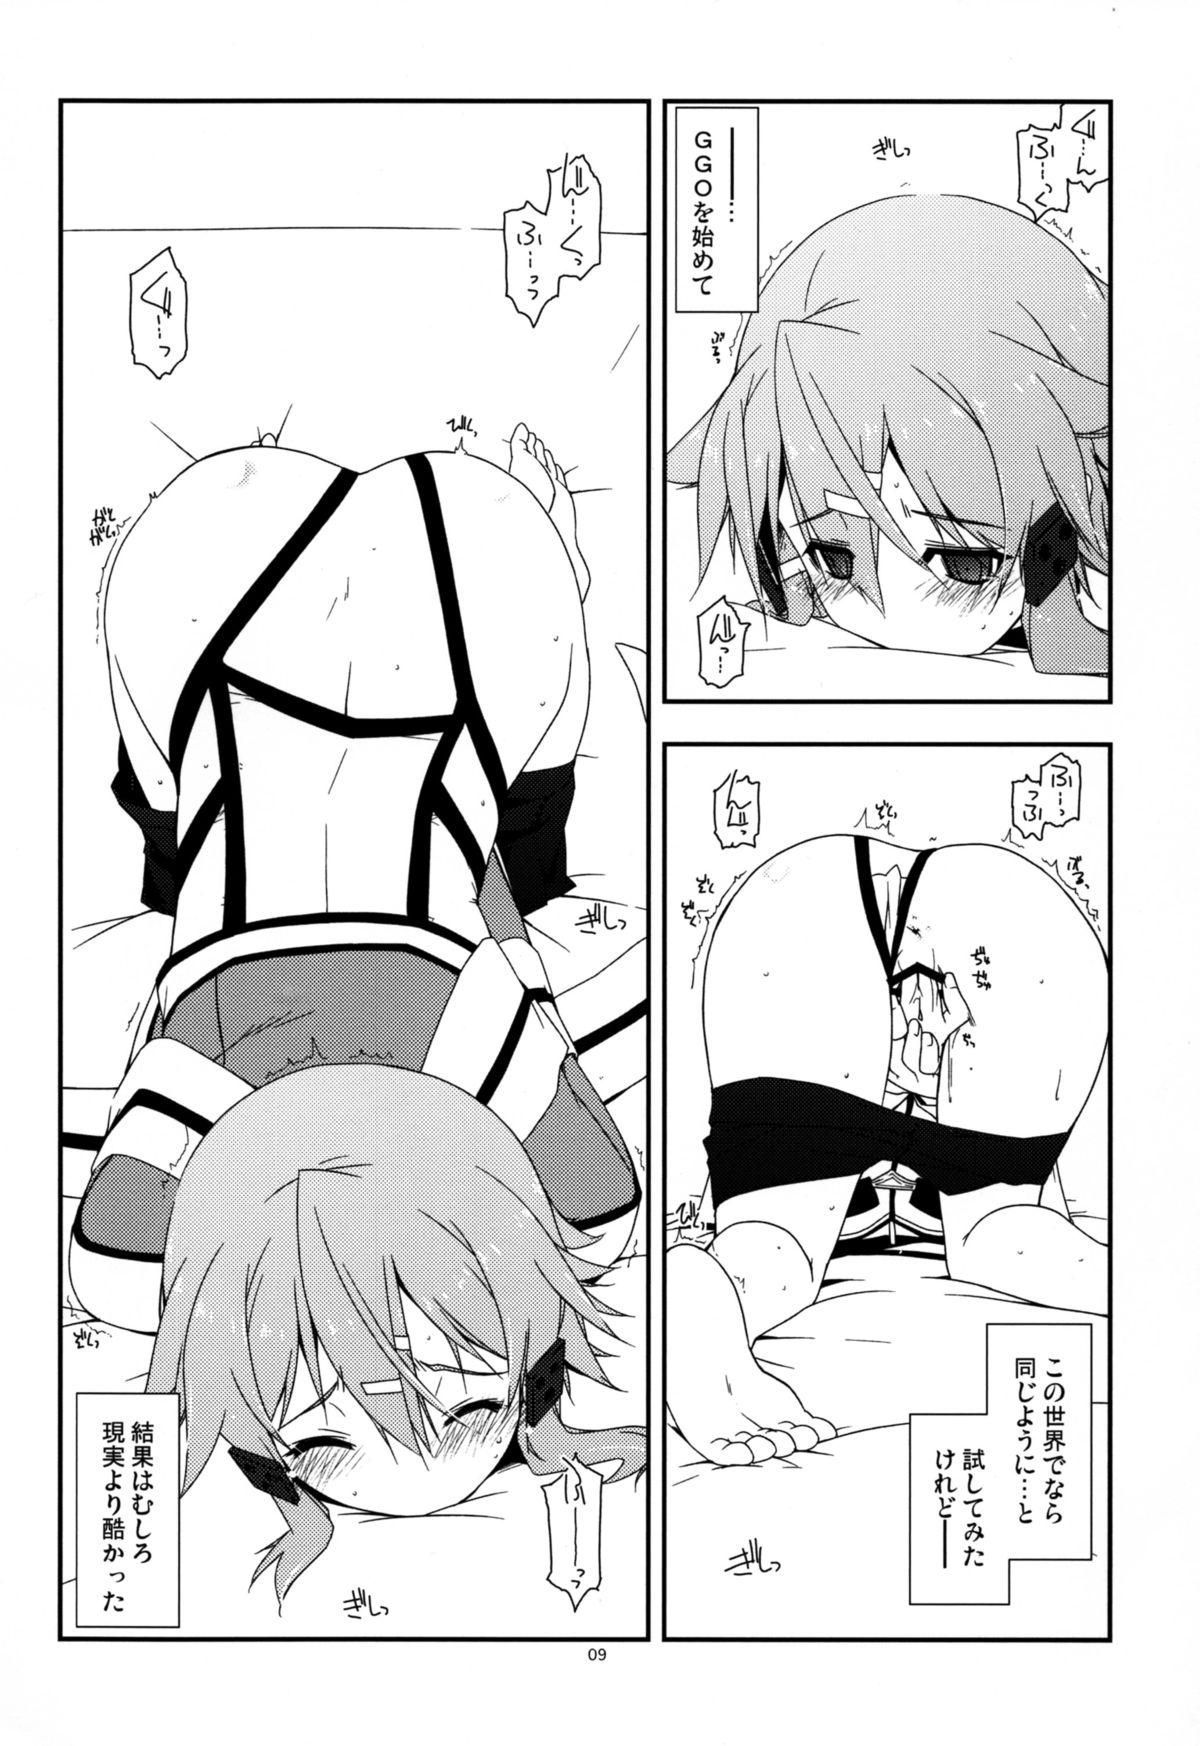 Rola Difference - Sword art online Gay Shorthair - Page 9